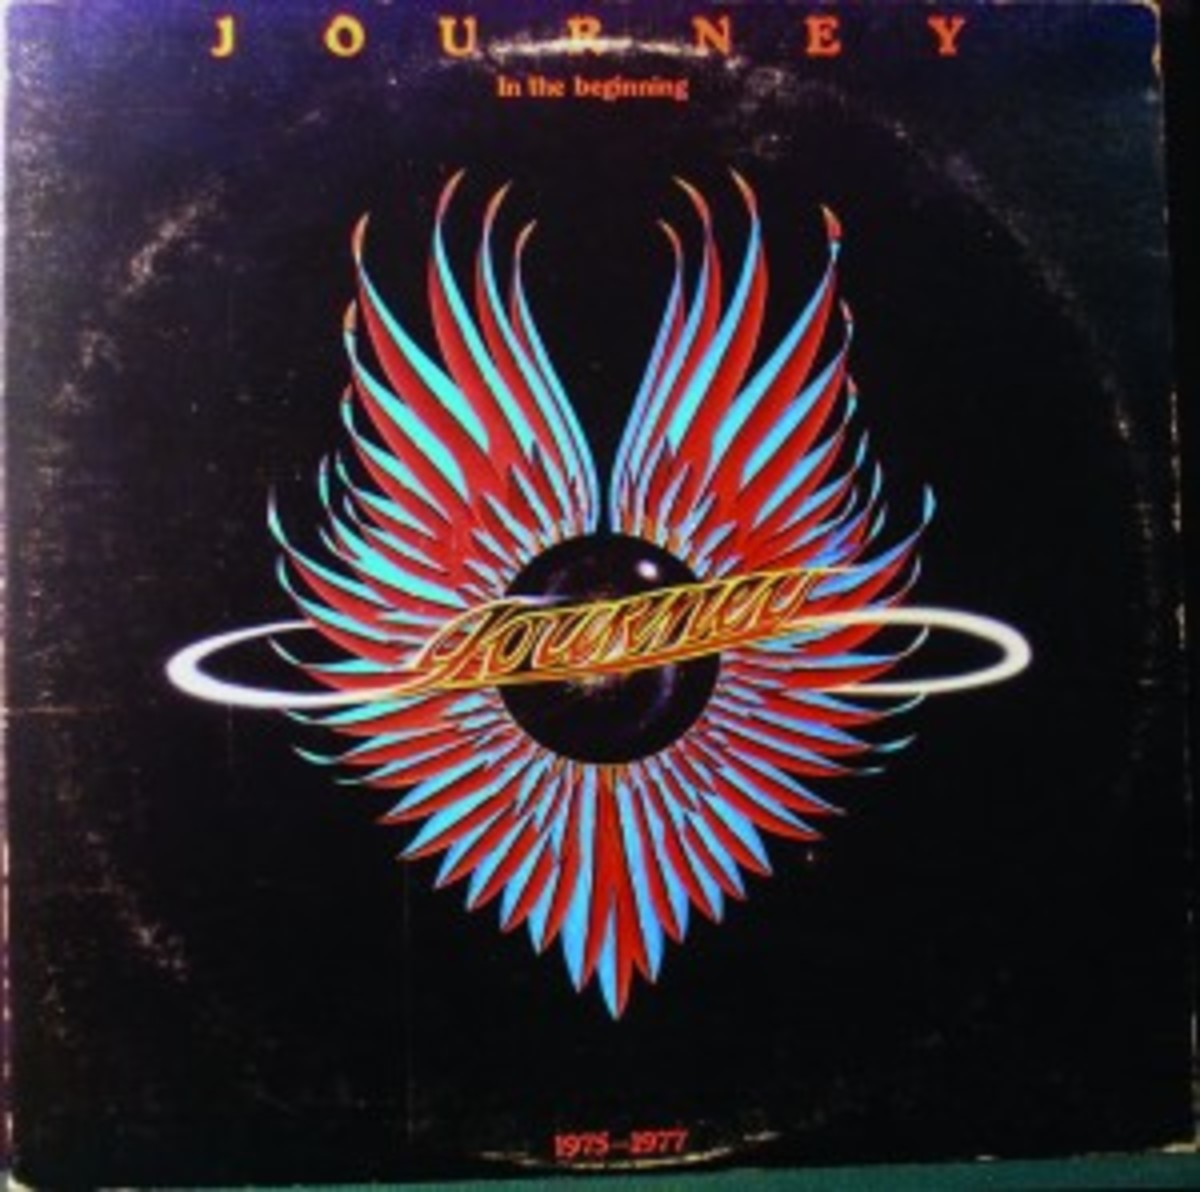 Journey In The Beginning 1975 to 1977